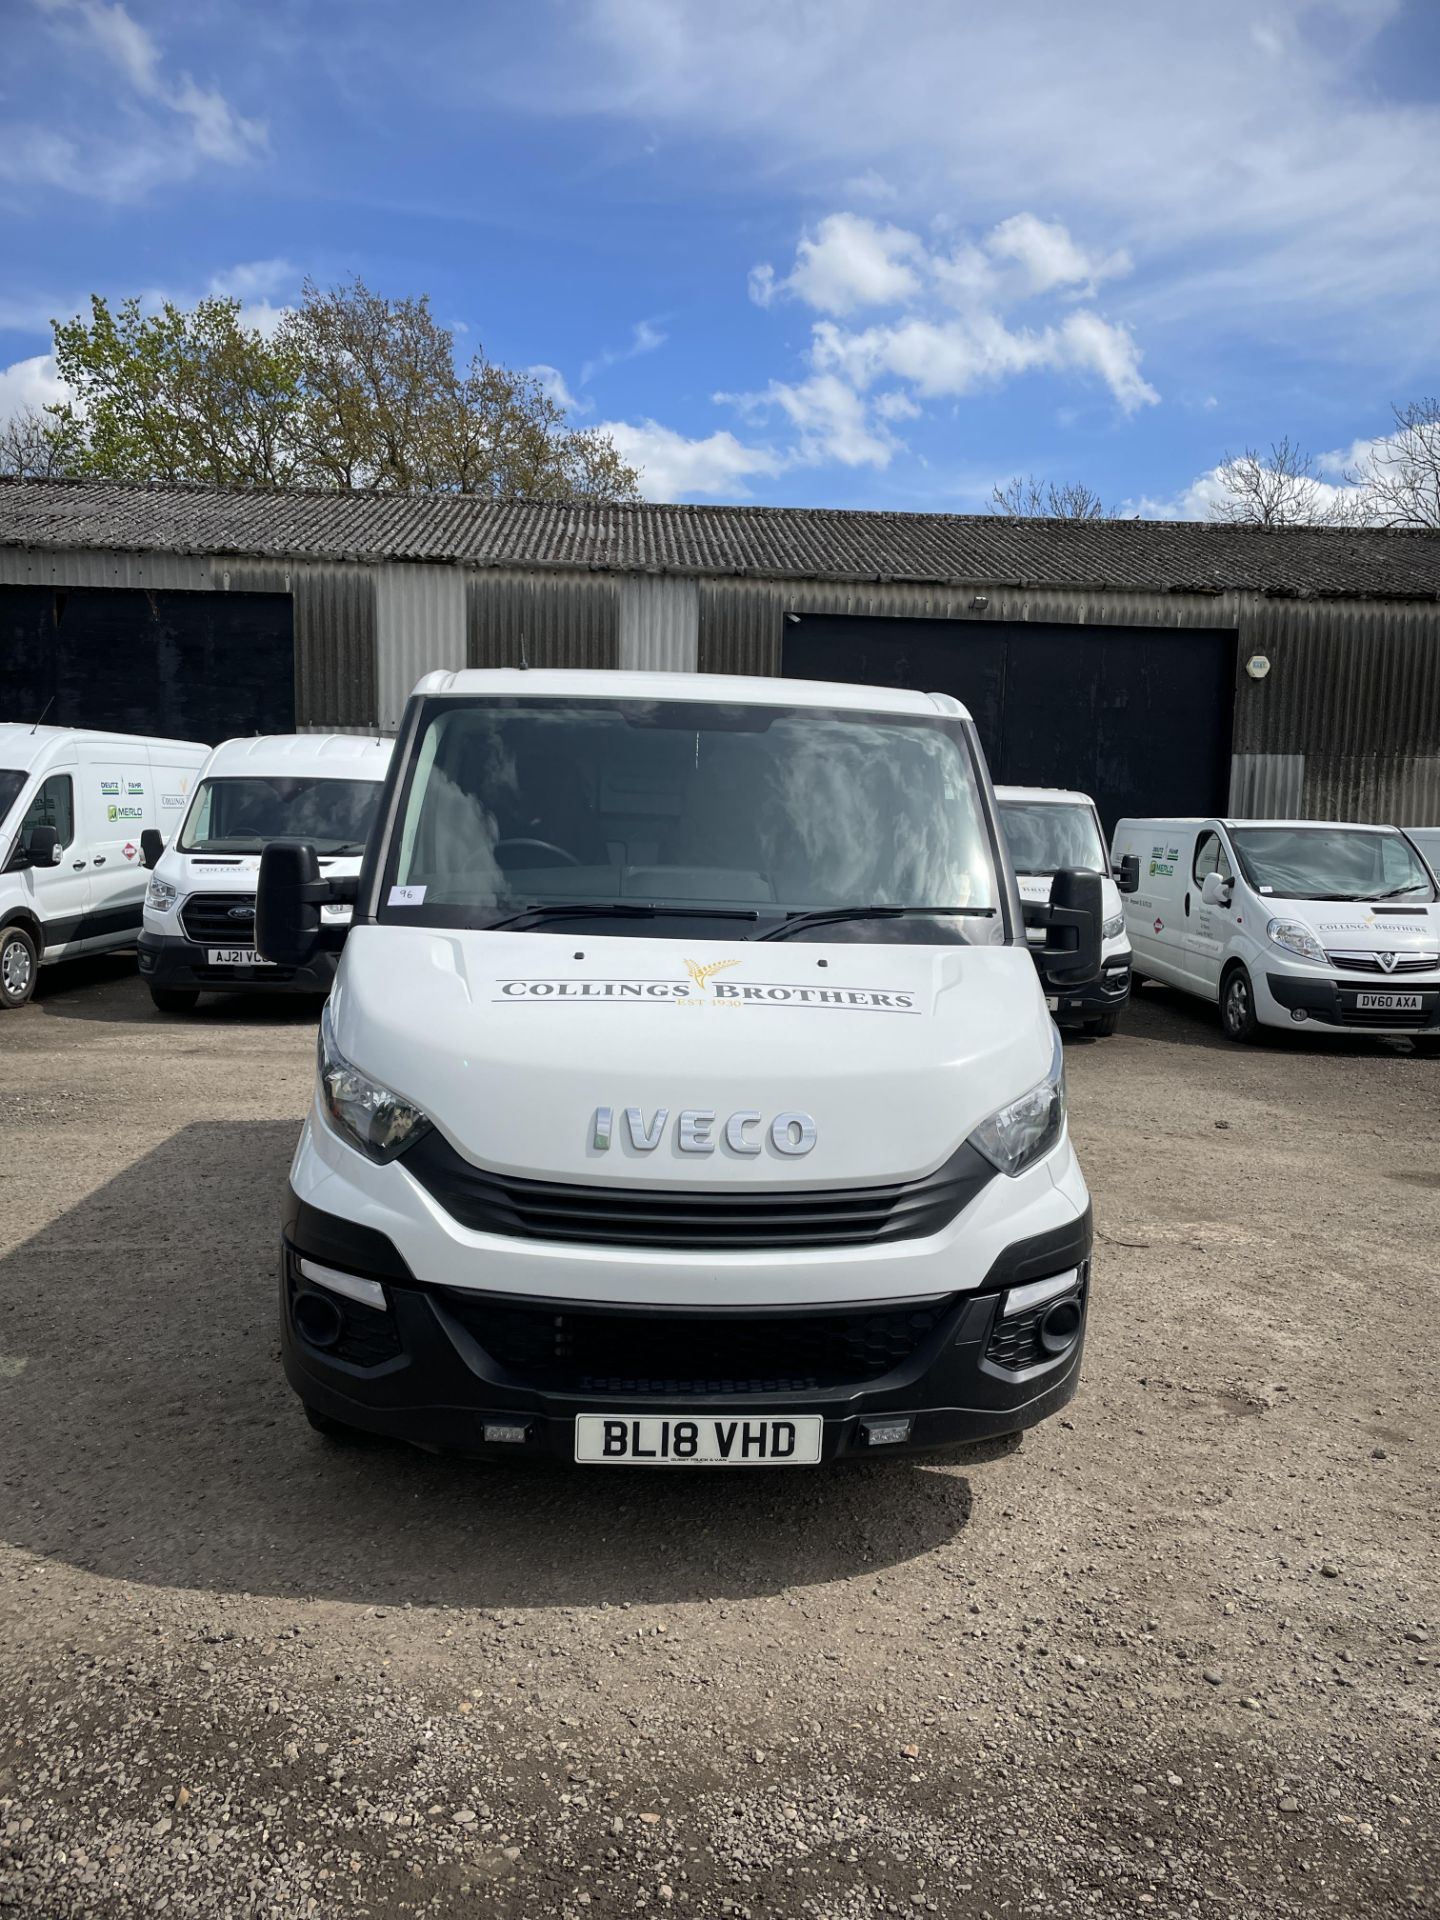 1: Iveco Daily 35-120 (3000) 2.3D 35S12 Panel Van, Registration No. BL18 VHD, Date First Registered